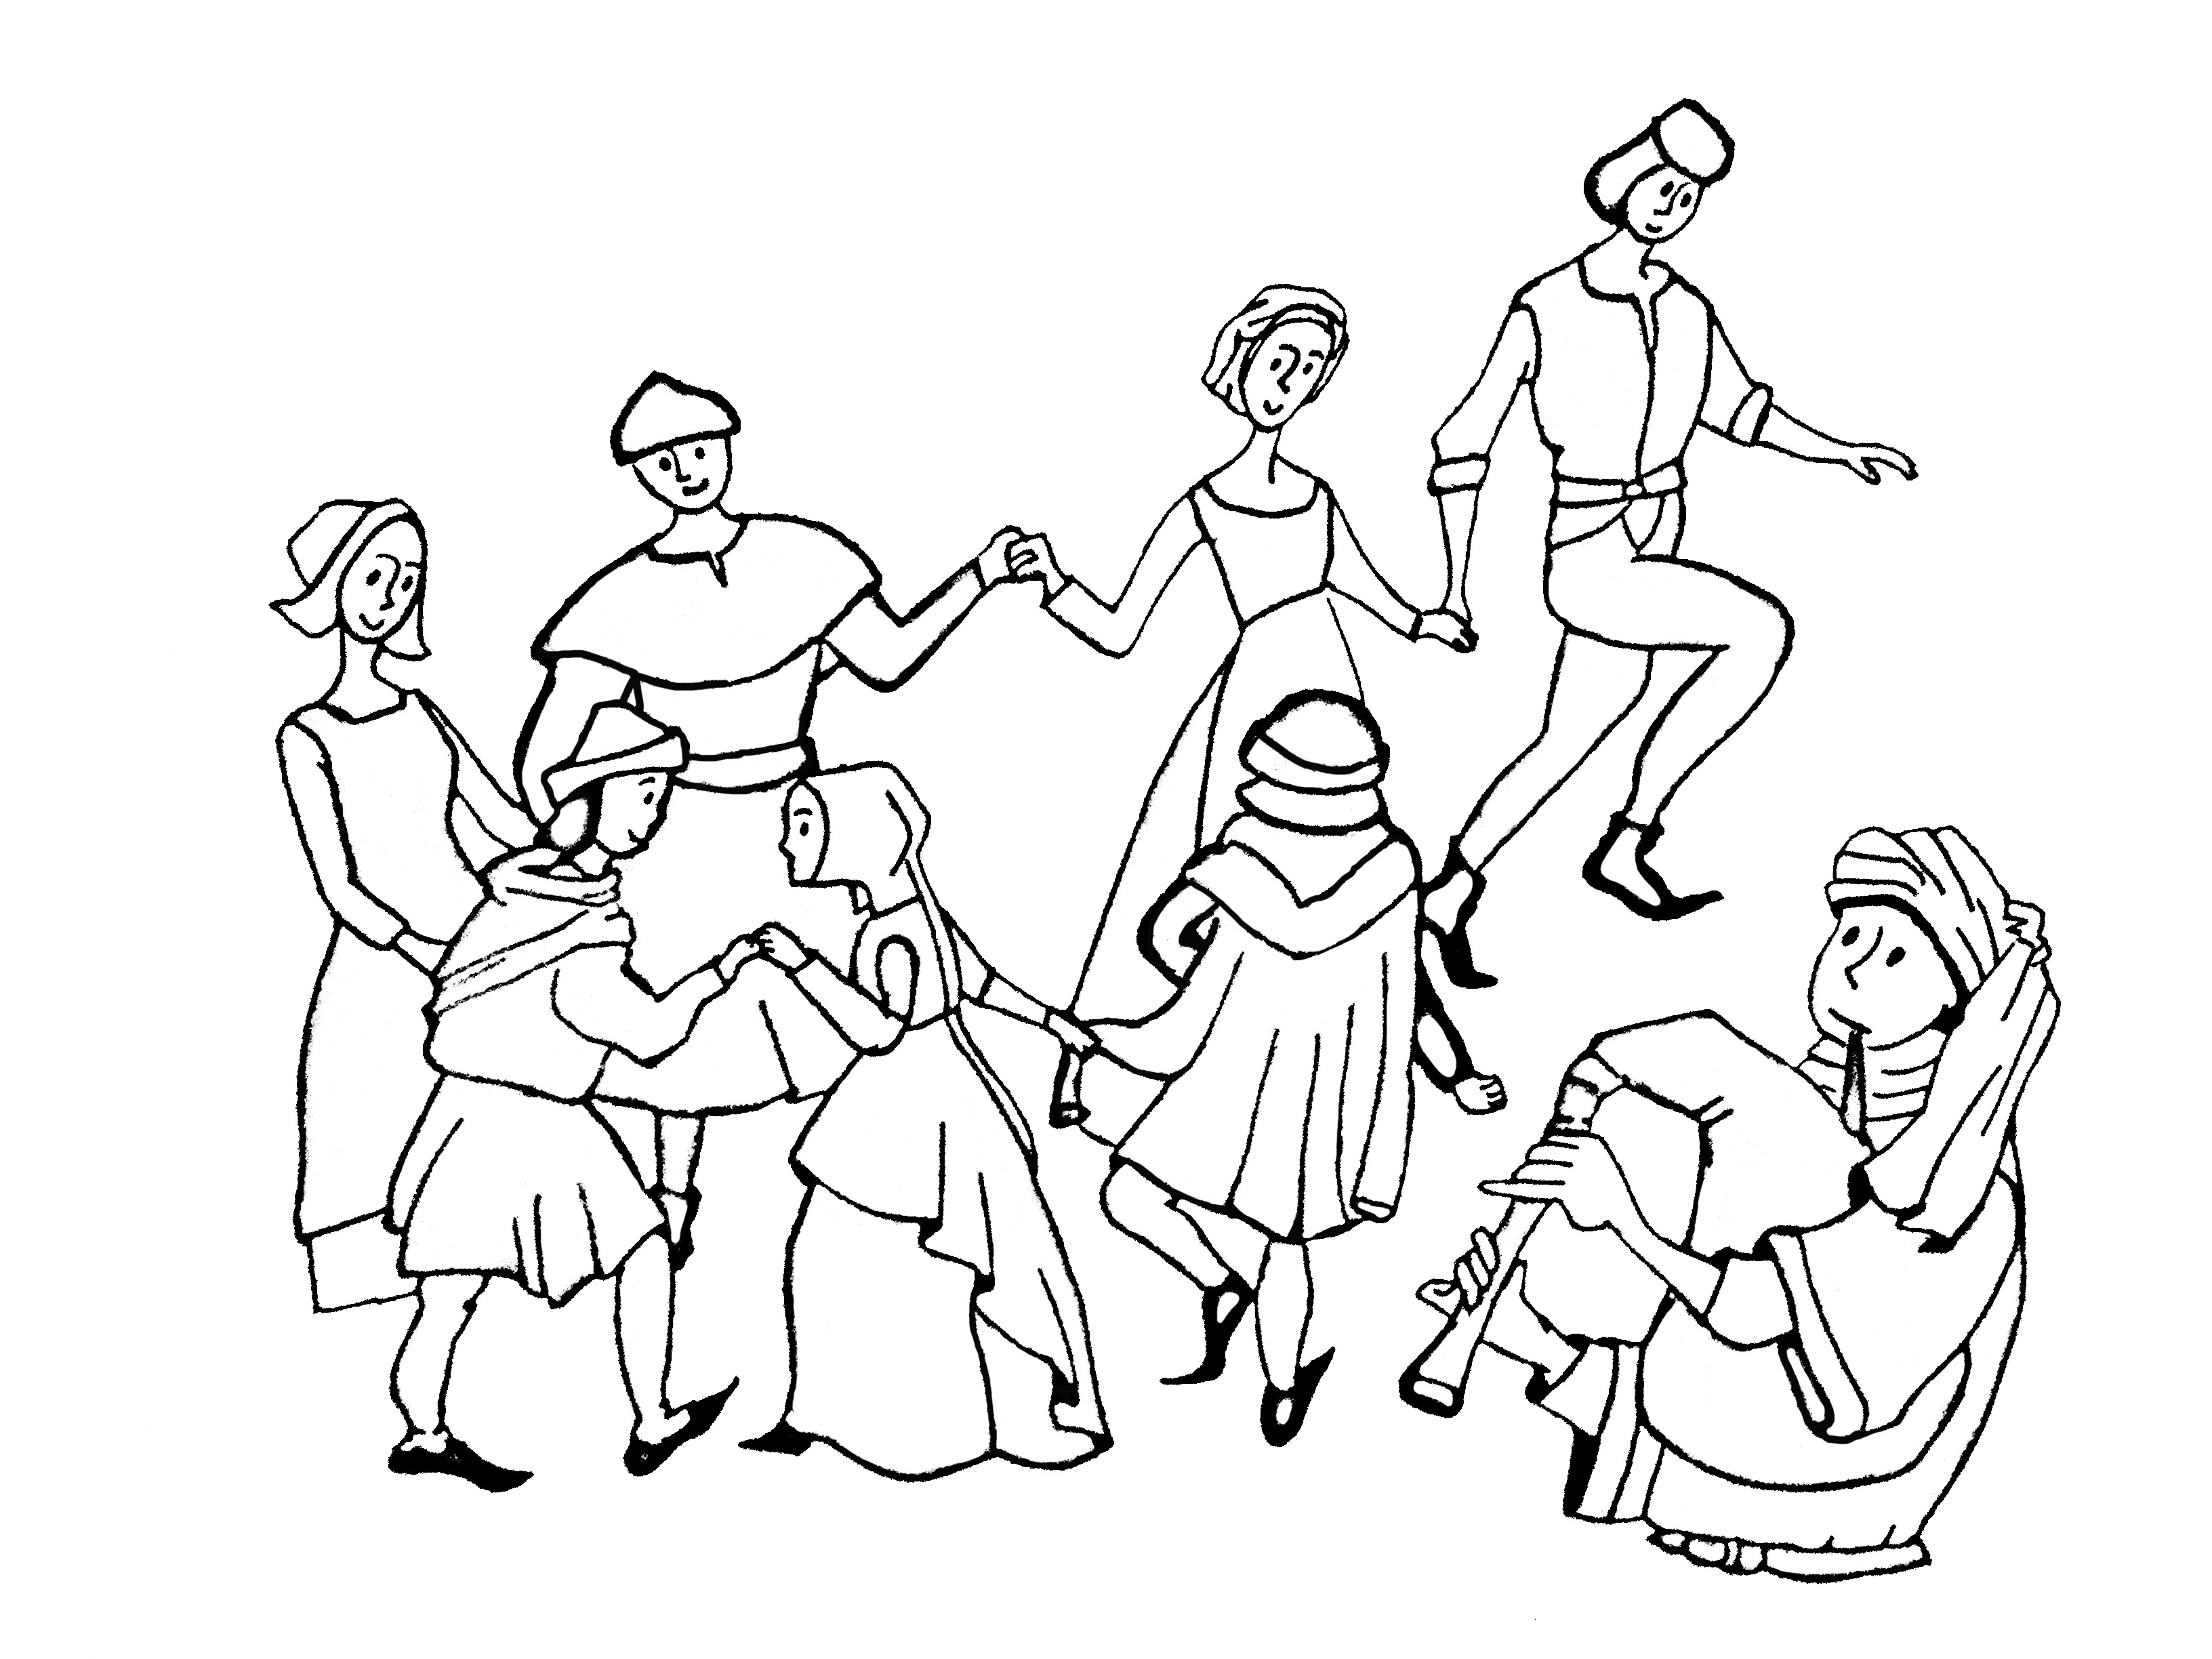 Middle age dance - Middle ages Adult Coloring Pages